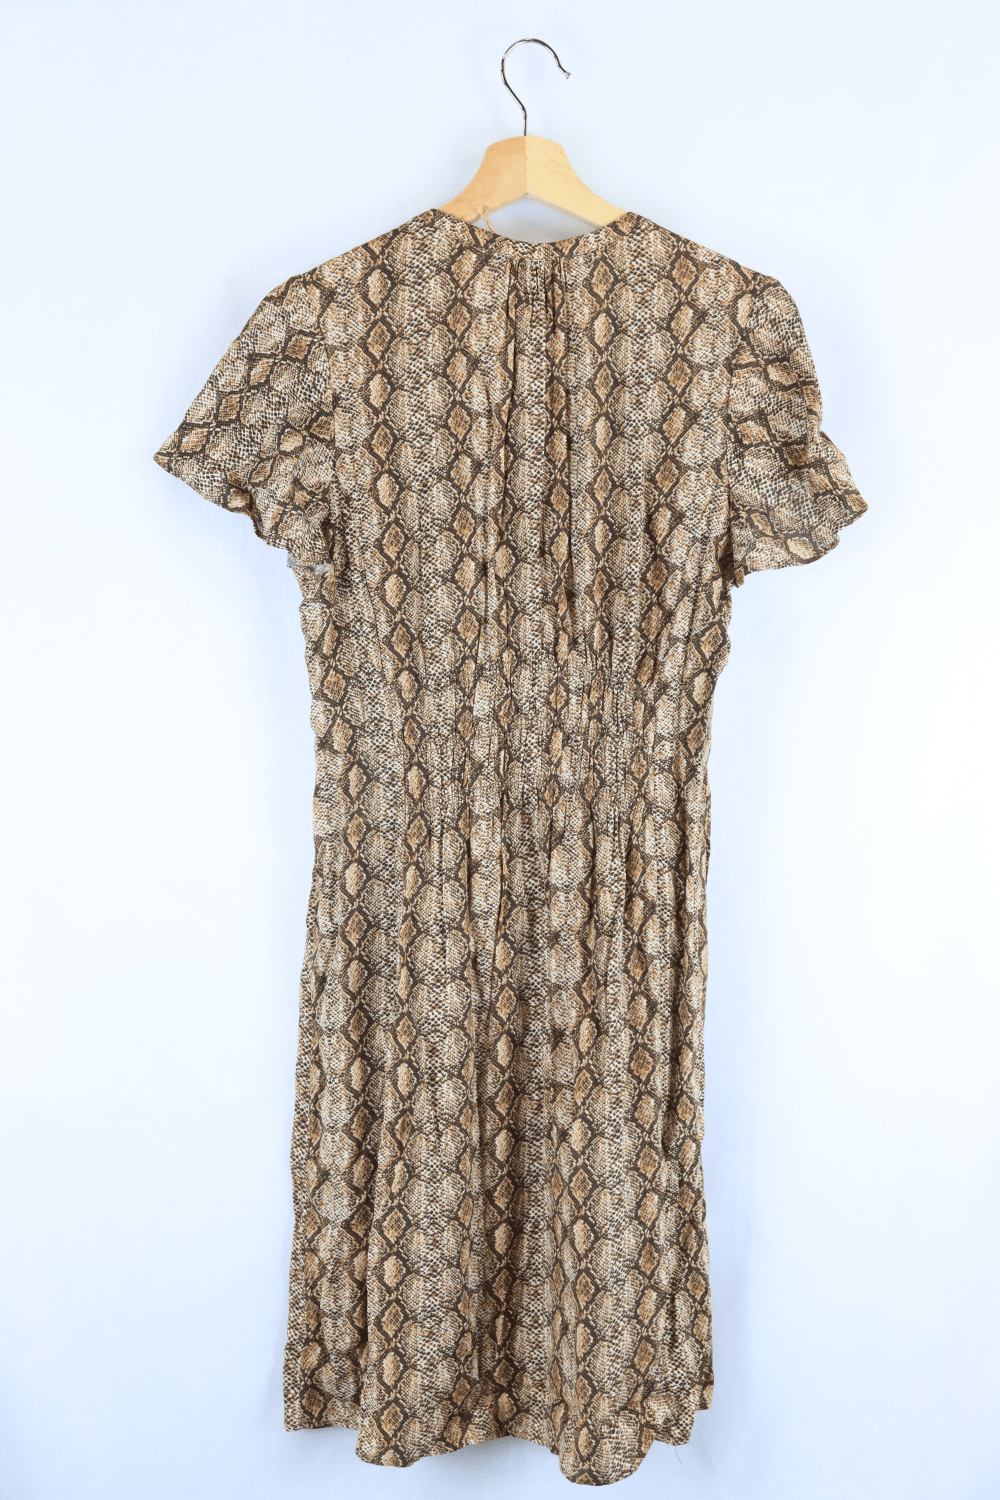 French Connection Animal Print Dress 10